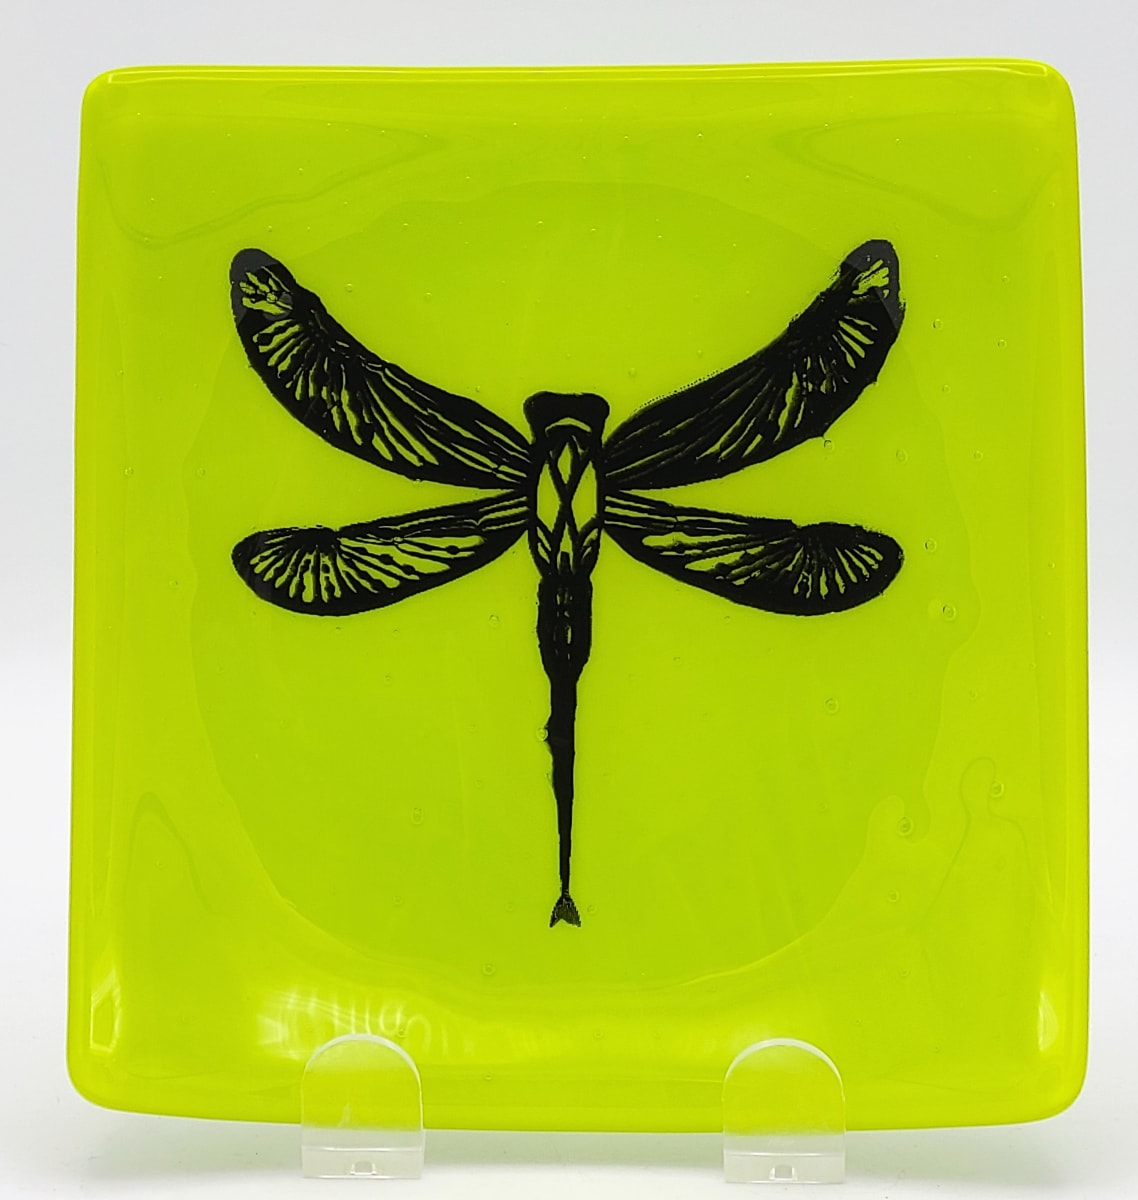 Small Plate-Dragonfly on Spring Green by Kathy Kollenburn 